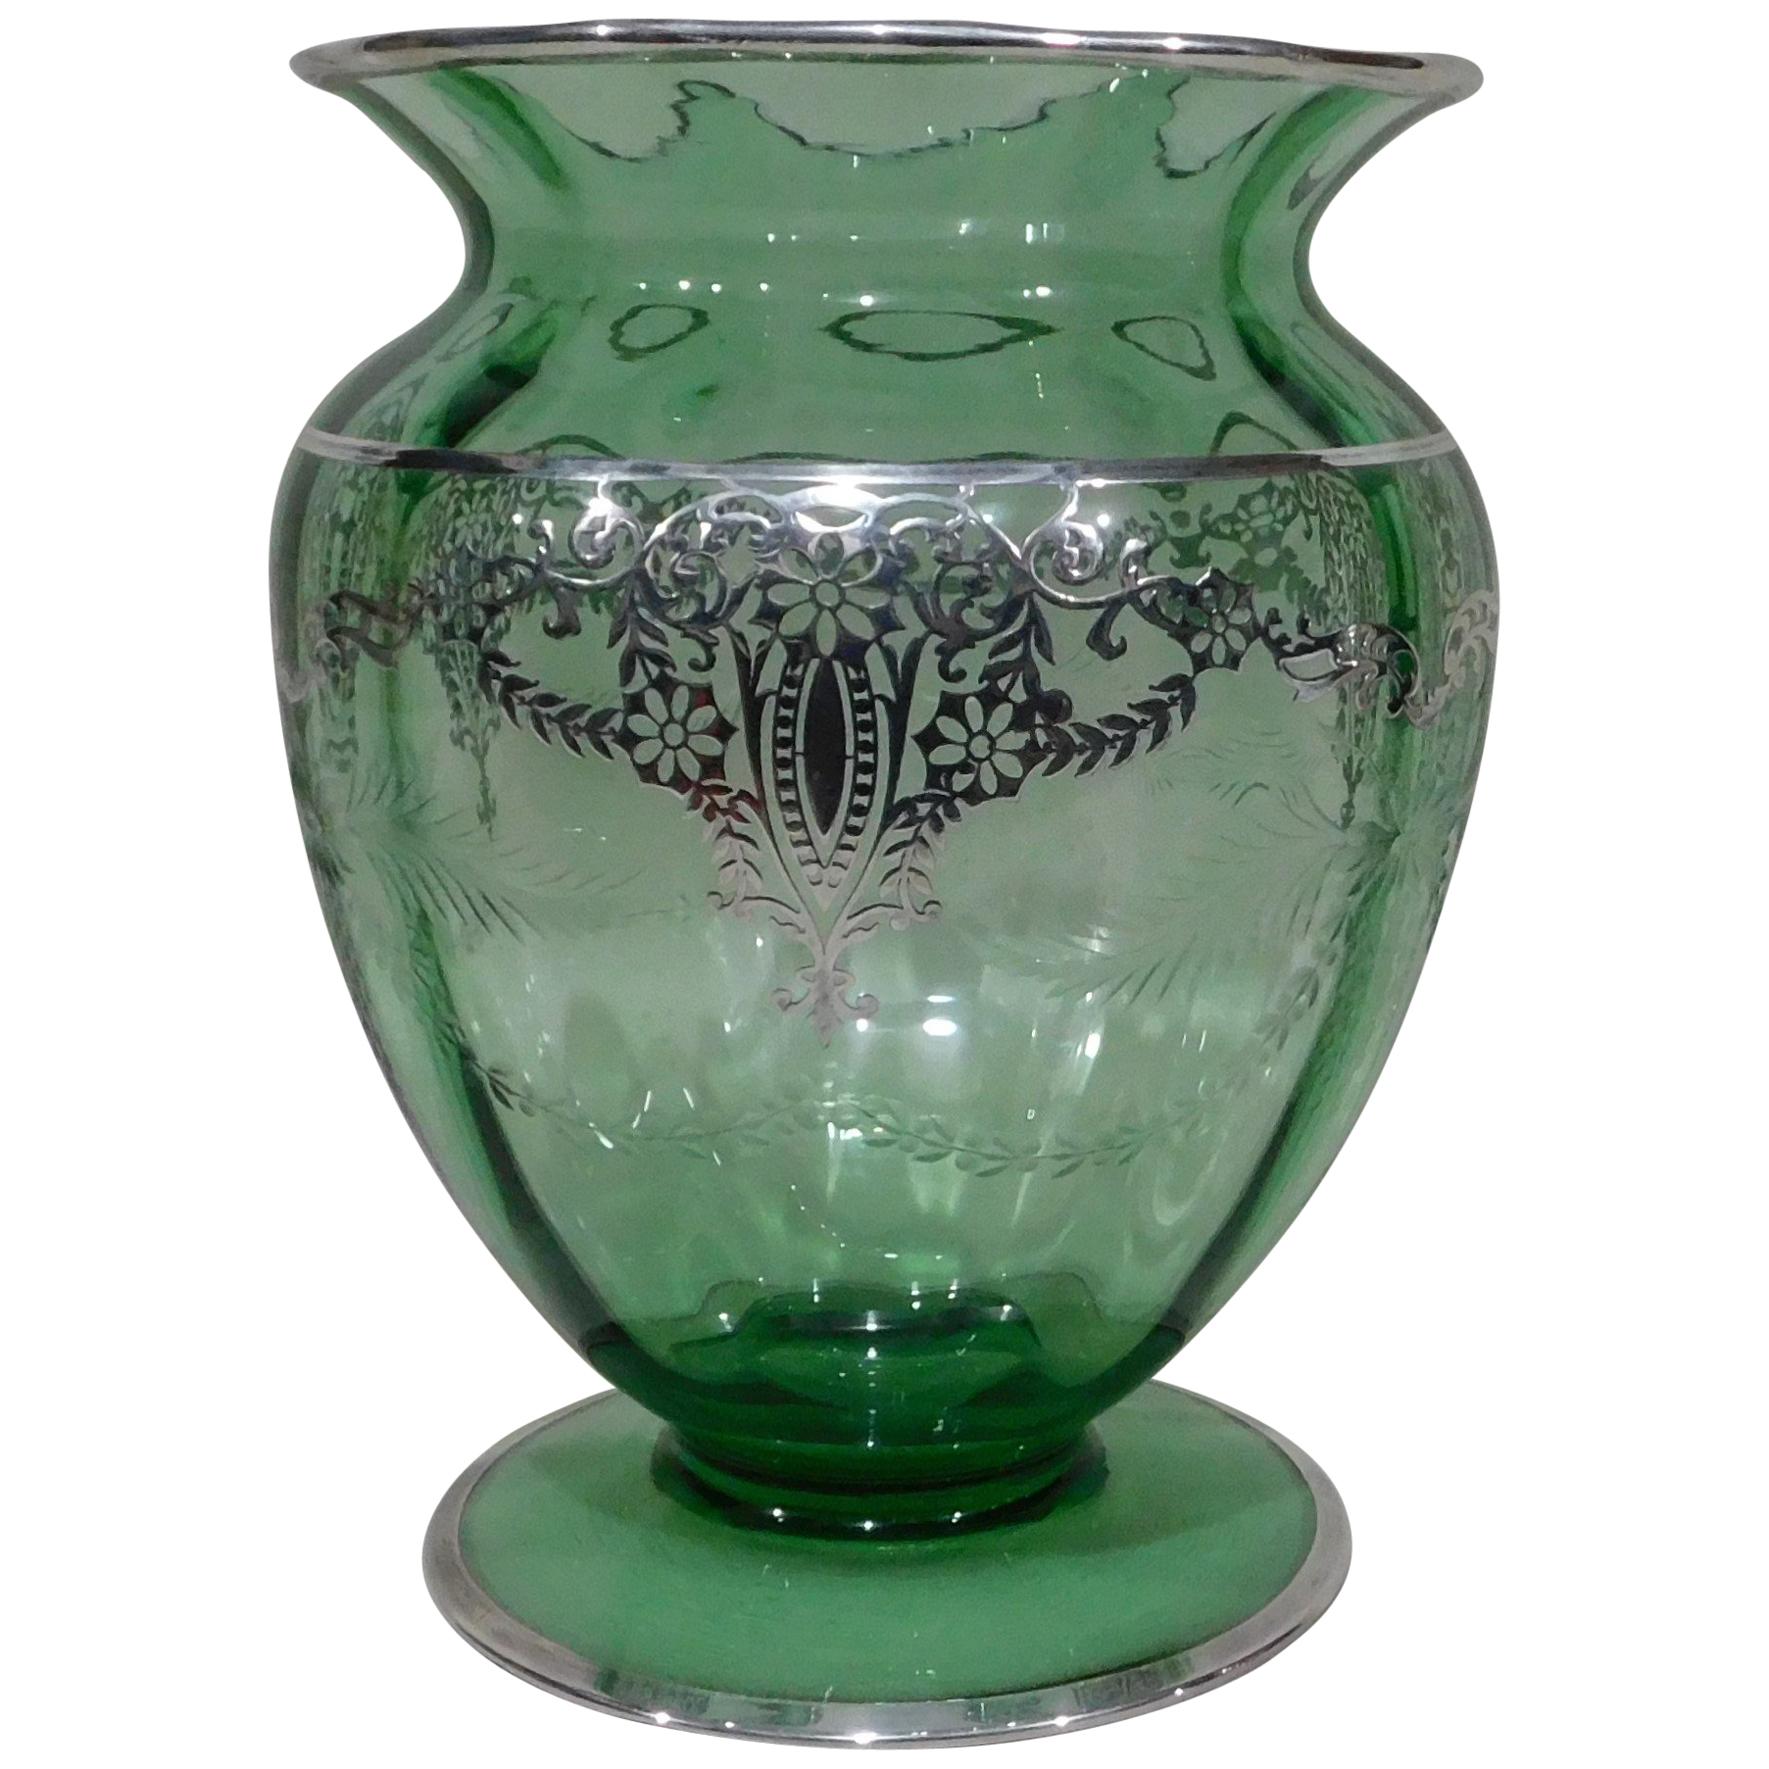 American Wheeled Cut Green Glass Vase with Silver Overlay, circa 1920s